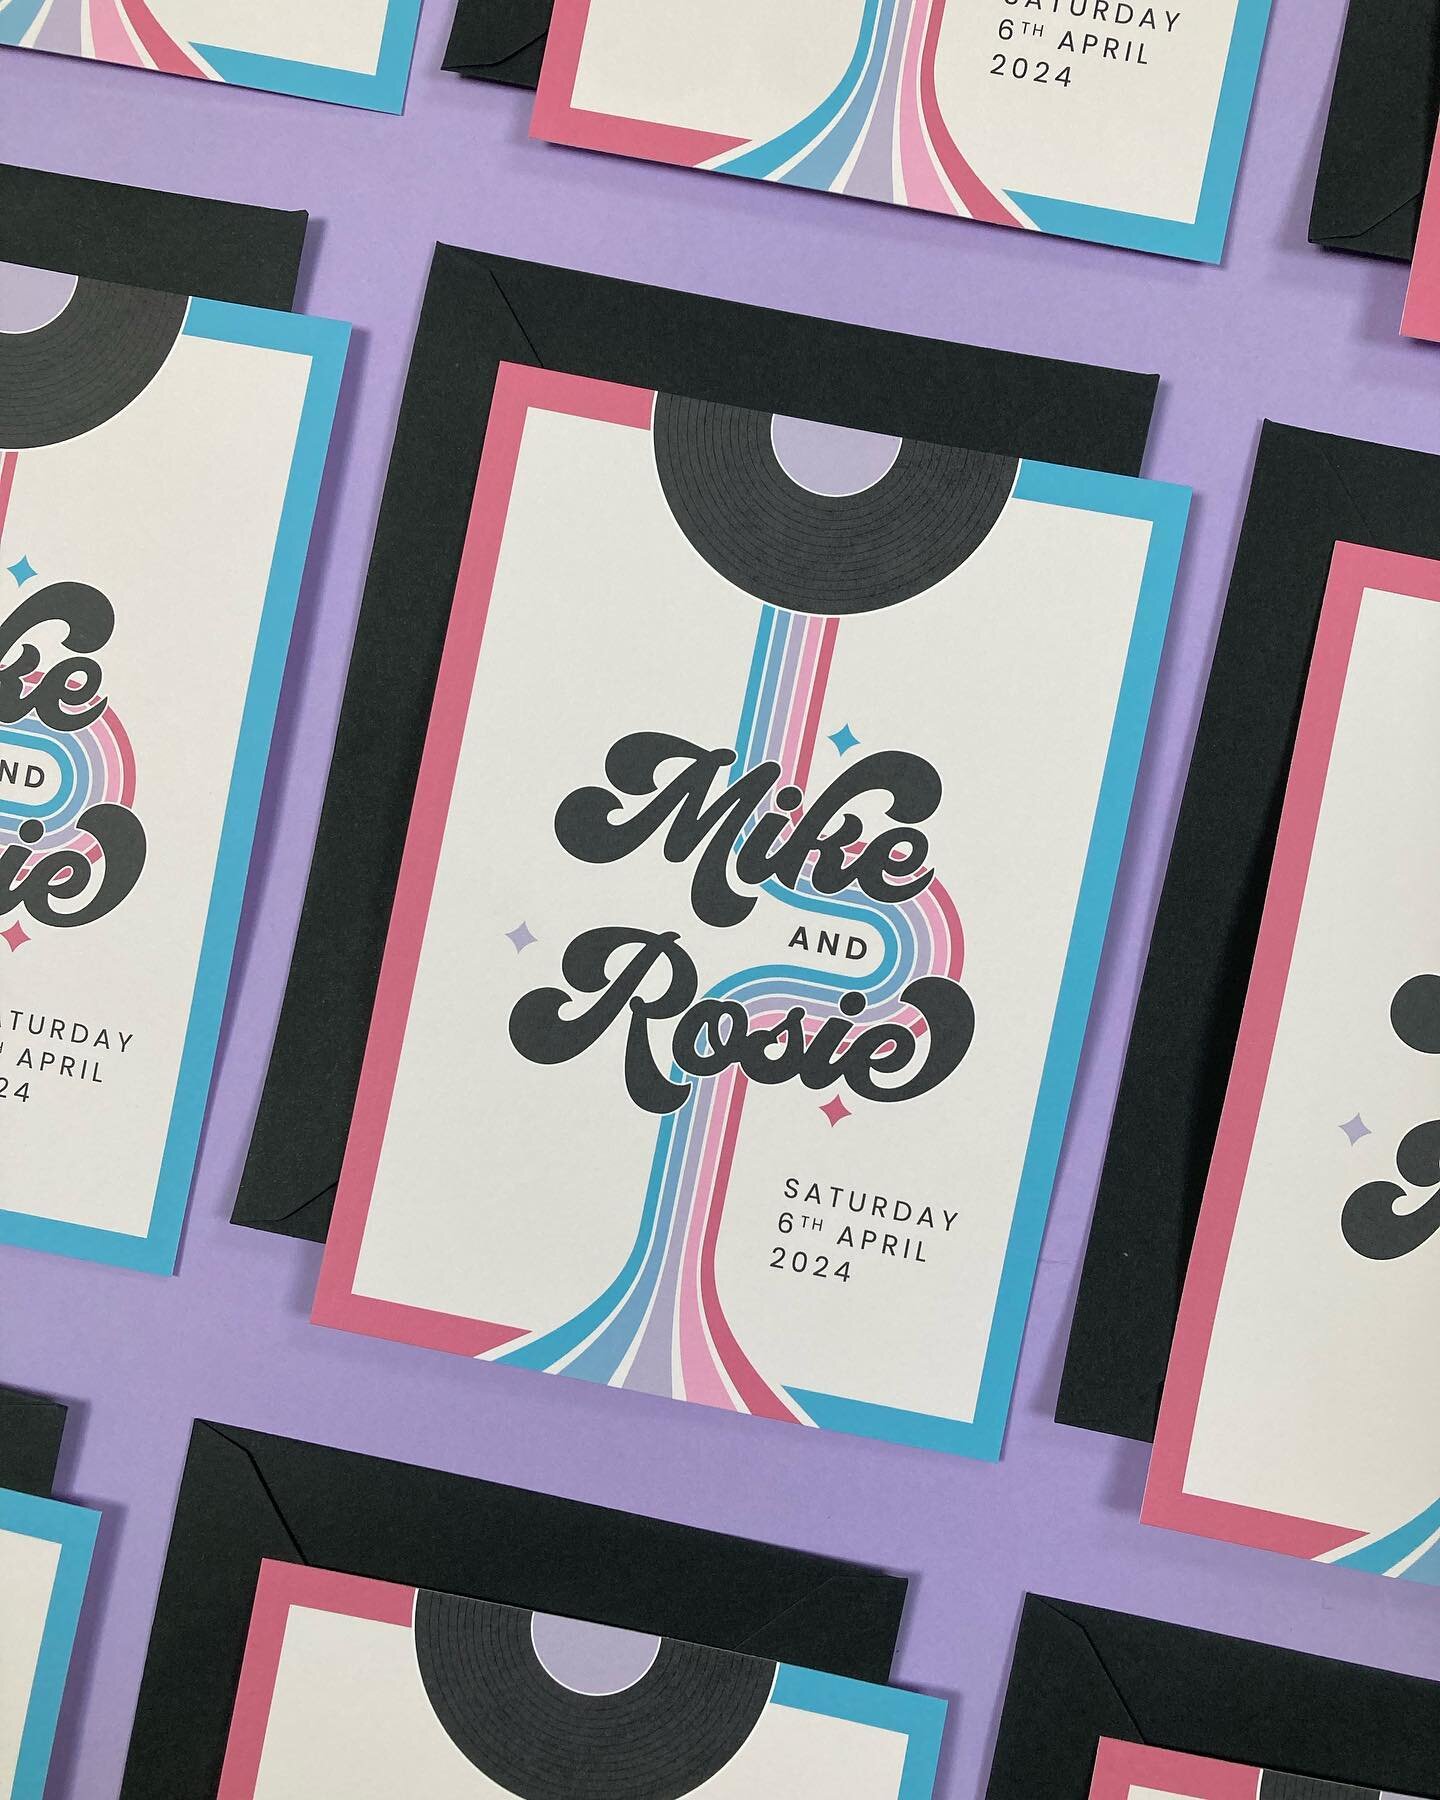 Mike and Rosie designed their own save the dates, so I came in later in the stationery process. For their invites, I took the colours and vibe they&rsquo;d already established and helped elevate it. It feels consistent with that they sent out to gues